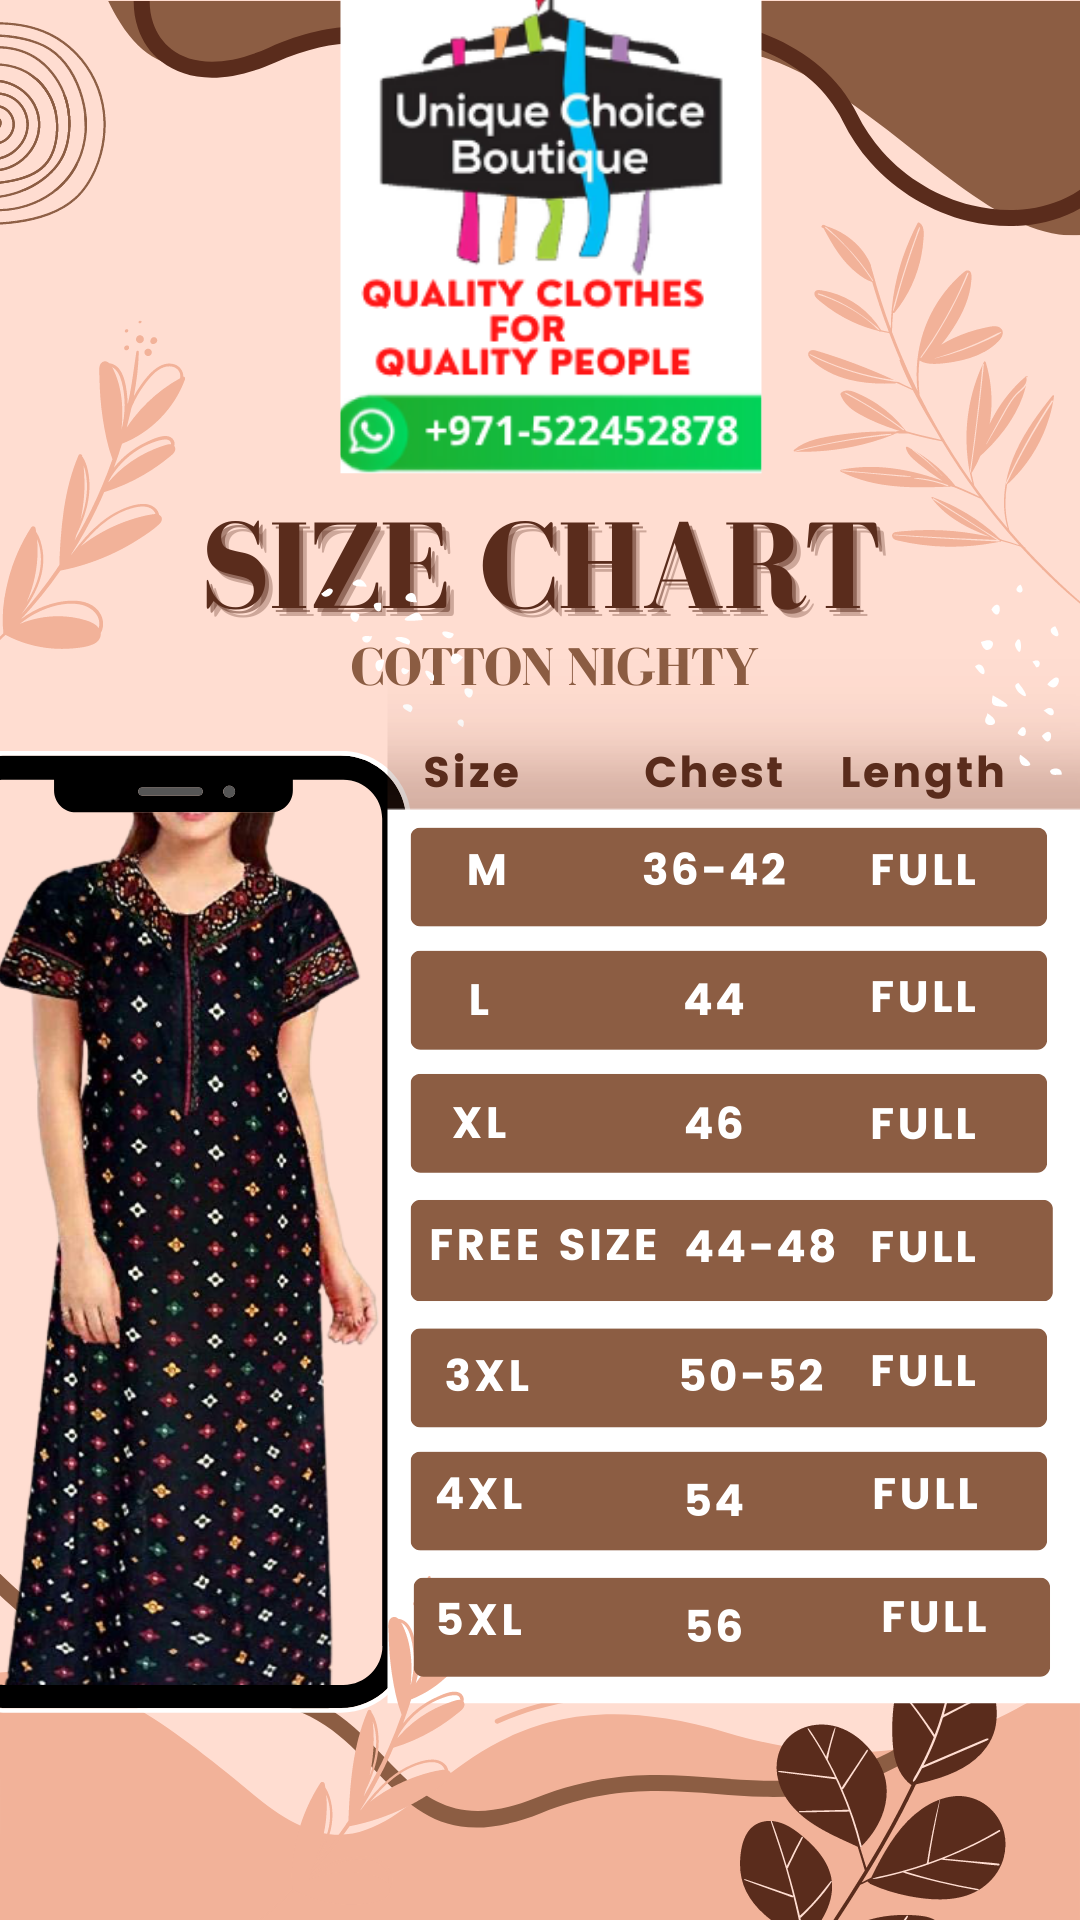 UNIQUE CHOICE Cotton Nighty, Night Gown-Pink-XXL/ Free Size